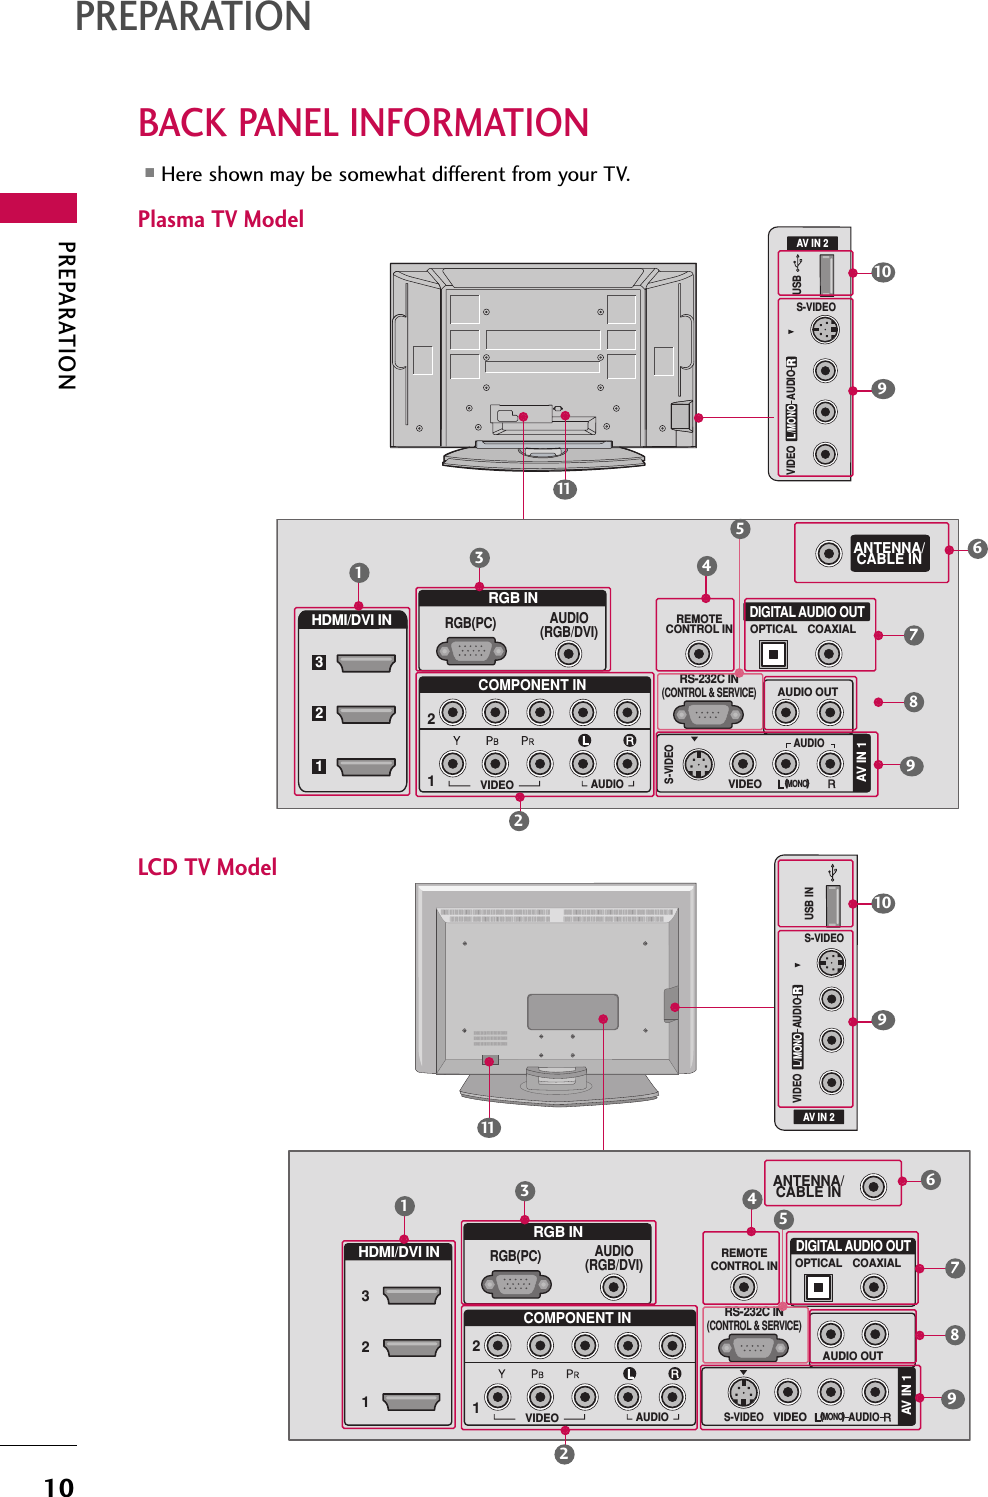 PREPARATION10BACK PANEL INFORMATIONPREPARATIONPlasma TV ModelLCD TV Model(            )AV IN 2L/MONORAUDIOVIDEOS-VIDEOUSBRGB INCOMPONENT INAUDIO(RGB/DVI)RGB(PC)REMOTECONTROL INANTENNA/CABLE IN12RS-232C IN(CONTROL &amp; SERVICE)VIDEOAUDIOVIDEOAUDIO OUTOPTICAL COAXIALMONO(                        )AUDIOS-VIDEODIGITAL AUDIO OUTAV IN 1RHDMI/DVI IN 321■Here shown may be somewhat different from your TV.13456782111099(            )AV IN 2L/MONORAUDIOVIDEOS-VIDEOUSB INRGB INHDMI/DVI INCOMPONENT INAUDIO(RGB/DVI)RGB(PC)REMOTECONTROL INANTENNA/CABLE IN11223RS-232C IN(CONTROL &amp; SERVICE)VIDEOAUDIOVIDEOAUDIO OUTOPTICAL COAXIALMONO(                        )AUDIOS-VIDEODIGITAL AUDIO OUTAV IN 1R13456782111099